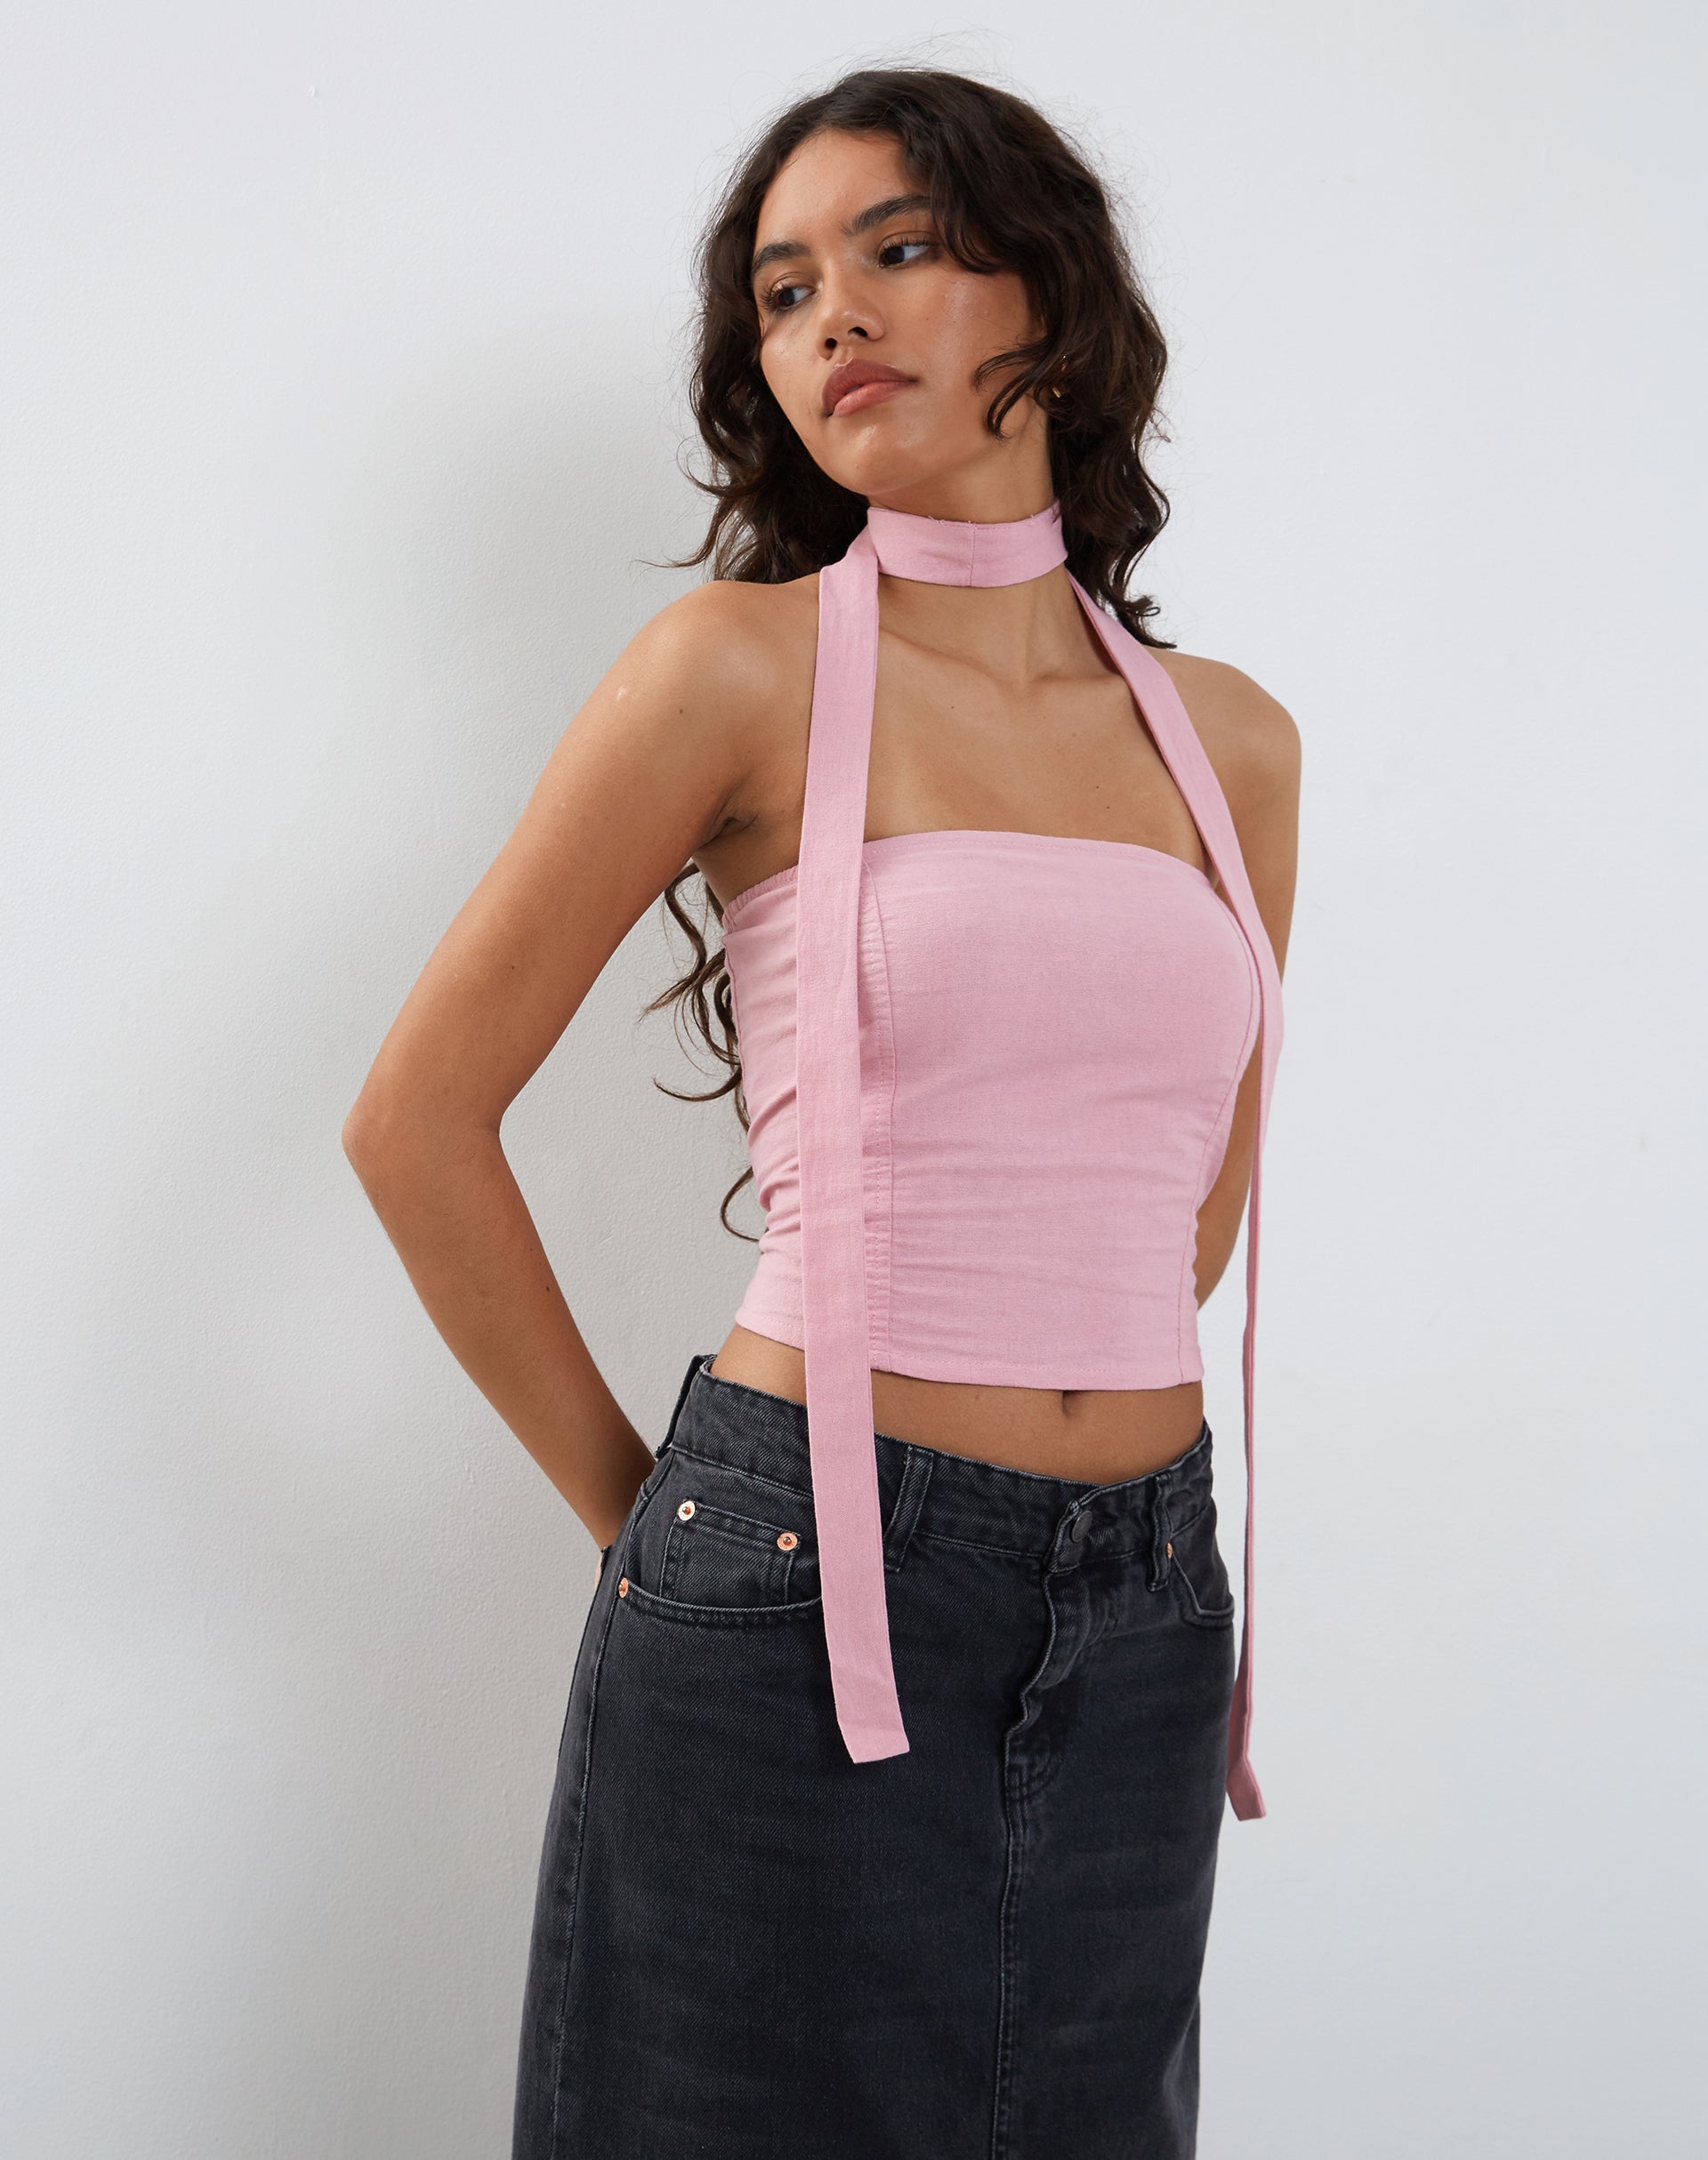 image of Shaloe Bandeau Top and Scarf Set in Flamingo Pink